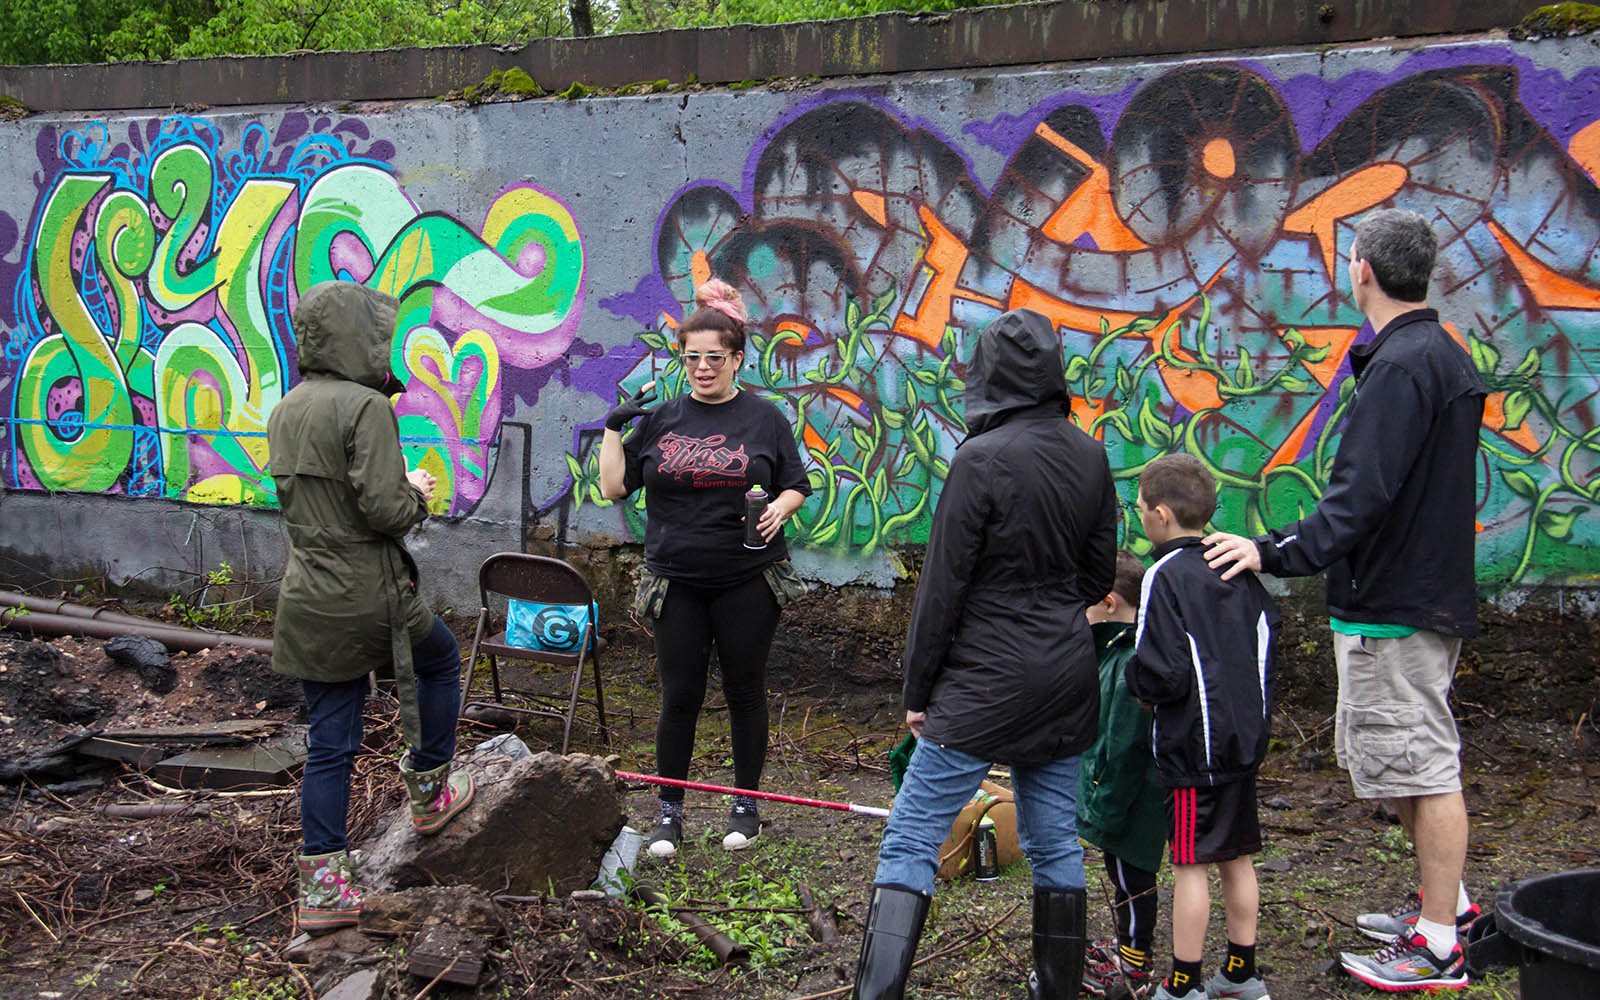 Graffiti artist Stef Skillz speaks with a family with a her mural in the background.